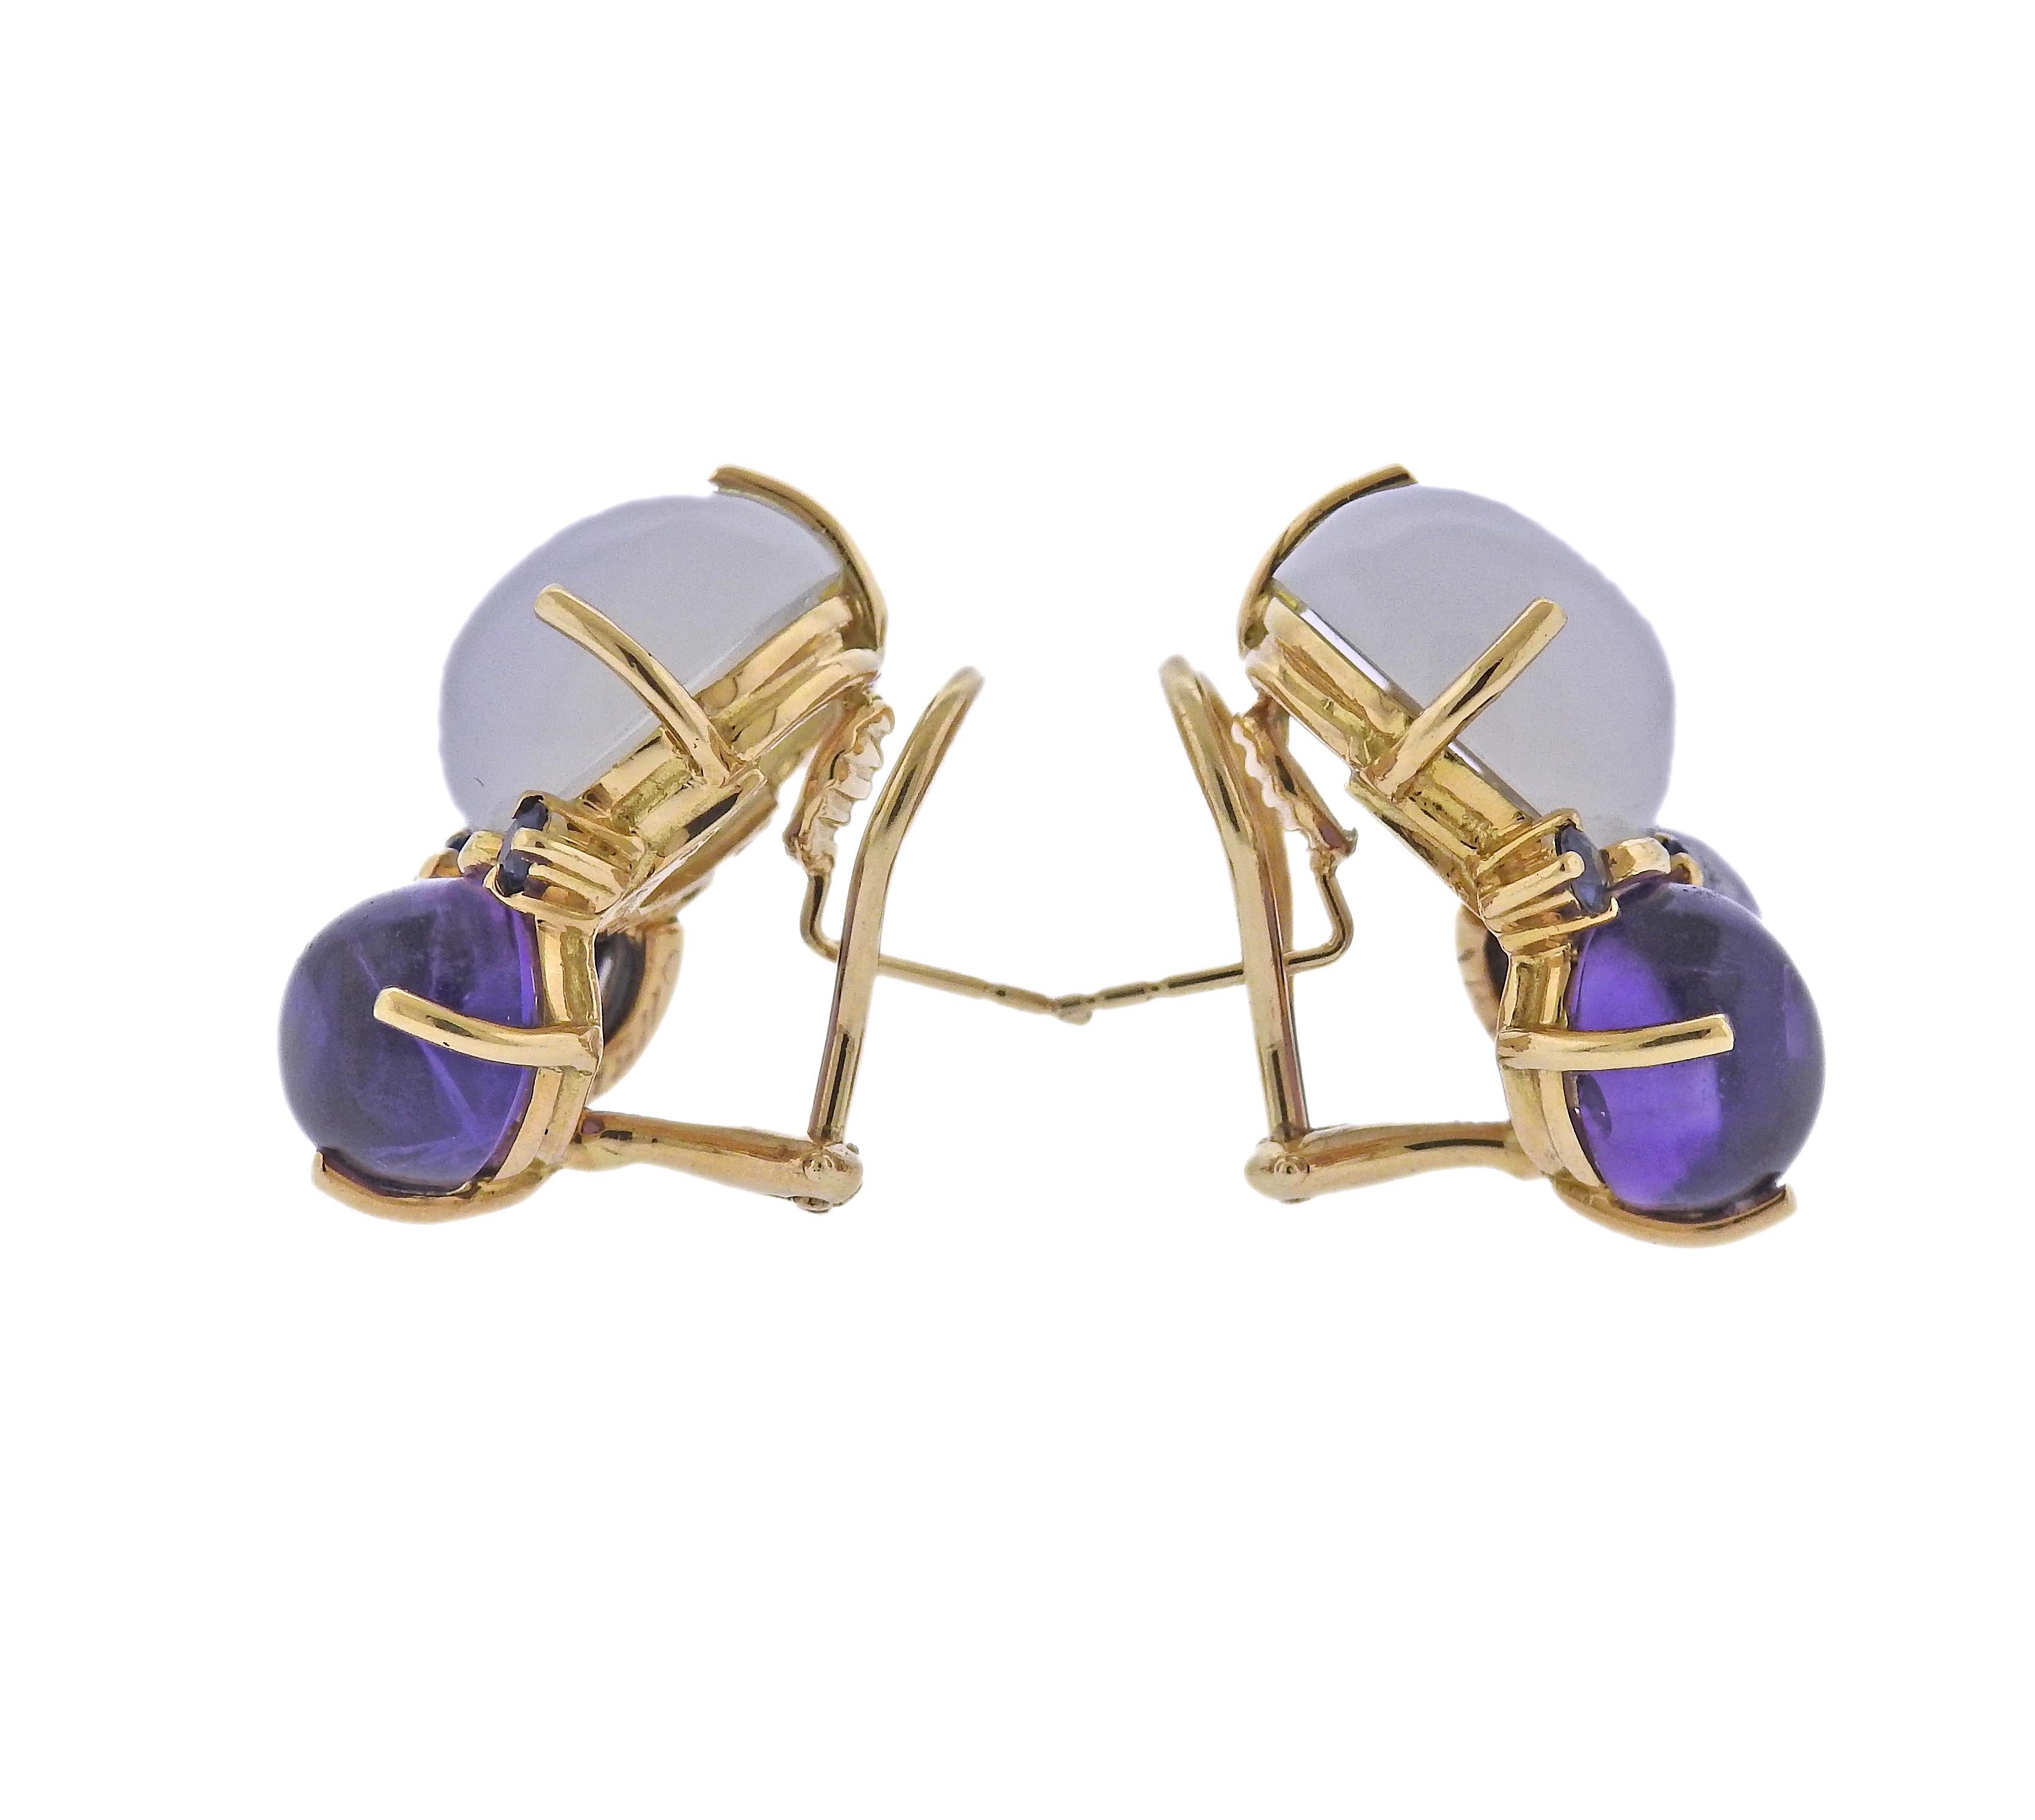 Pair of 18k gold earrings by Seaman Schepps, with chalcedony, amethyst, iolite and sapphires. Come with Seaman Schepps box. Earrings are 25mm x 18mm. Marked: 750, Shell hallmark, Seaman Schepps, Serial number. Weight - 19.3 grams.